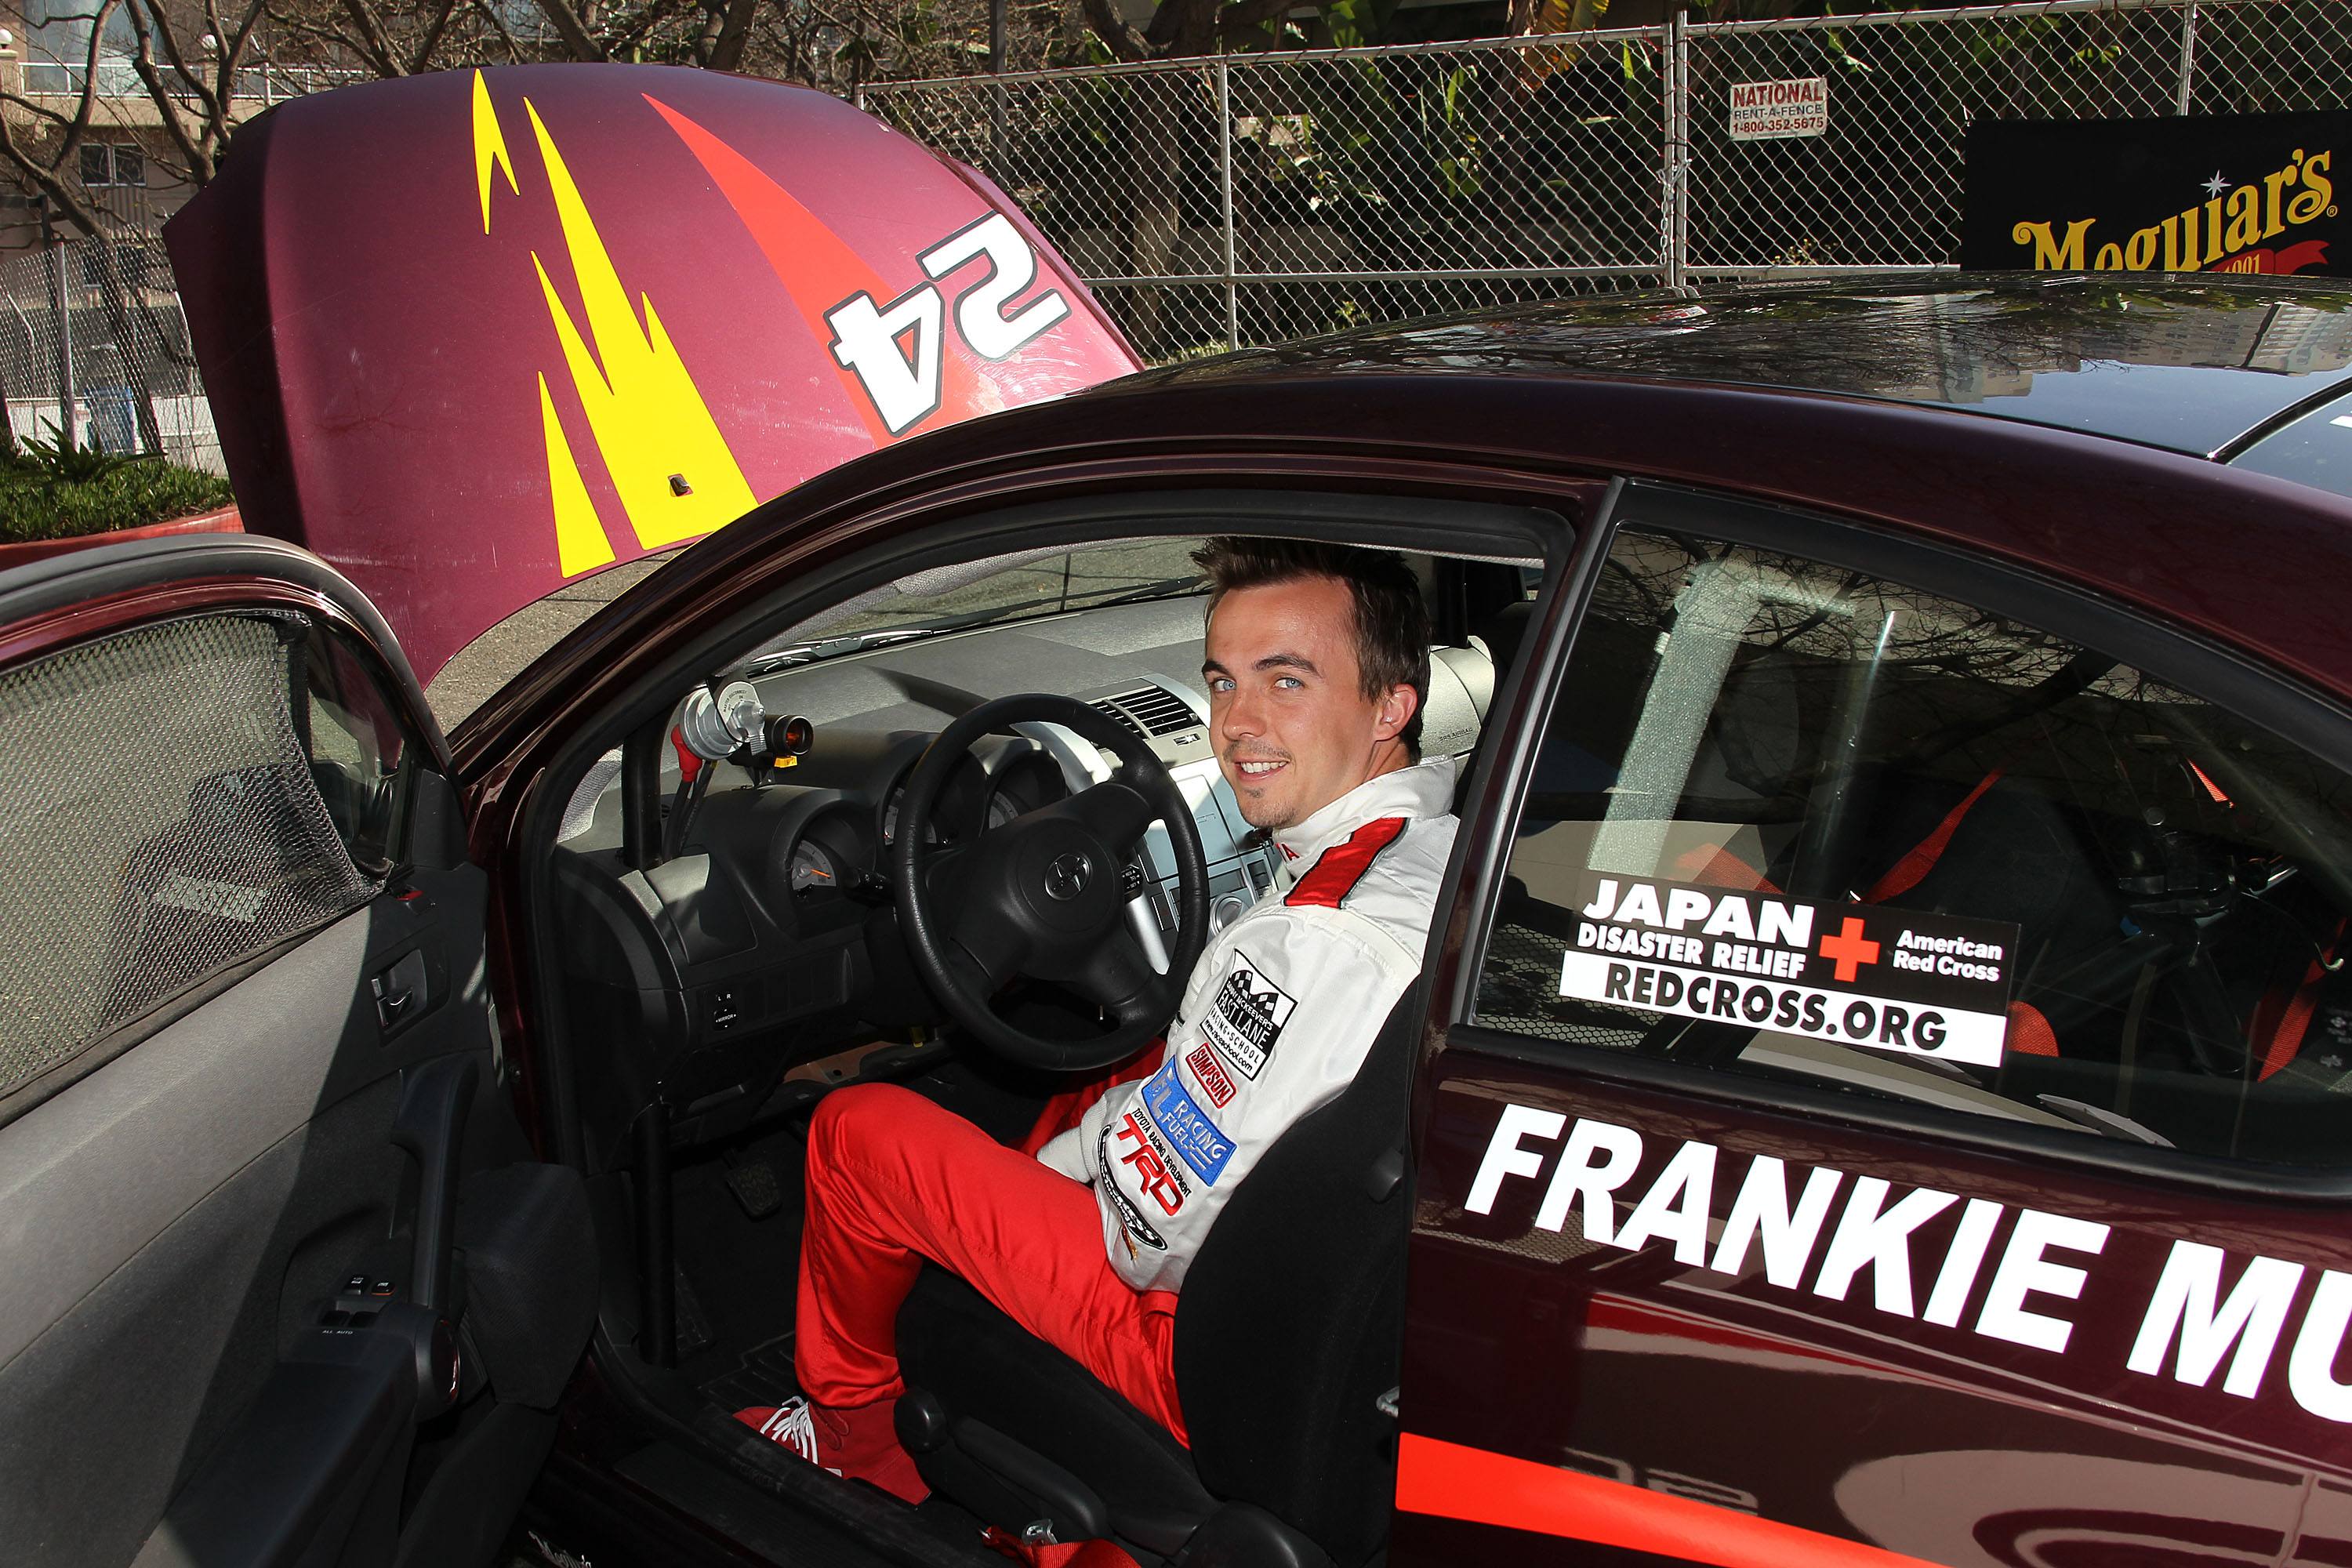 Frankie Muniz at the the 35th Annual Toyota Pro/Celebrity Race practice in 2011